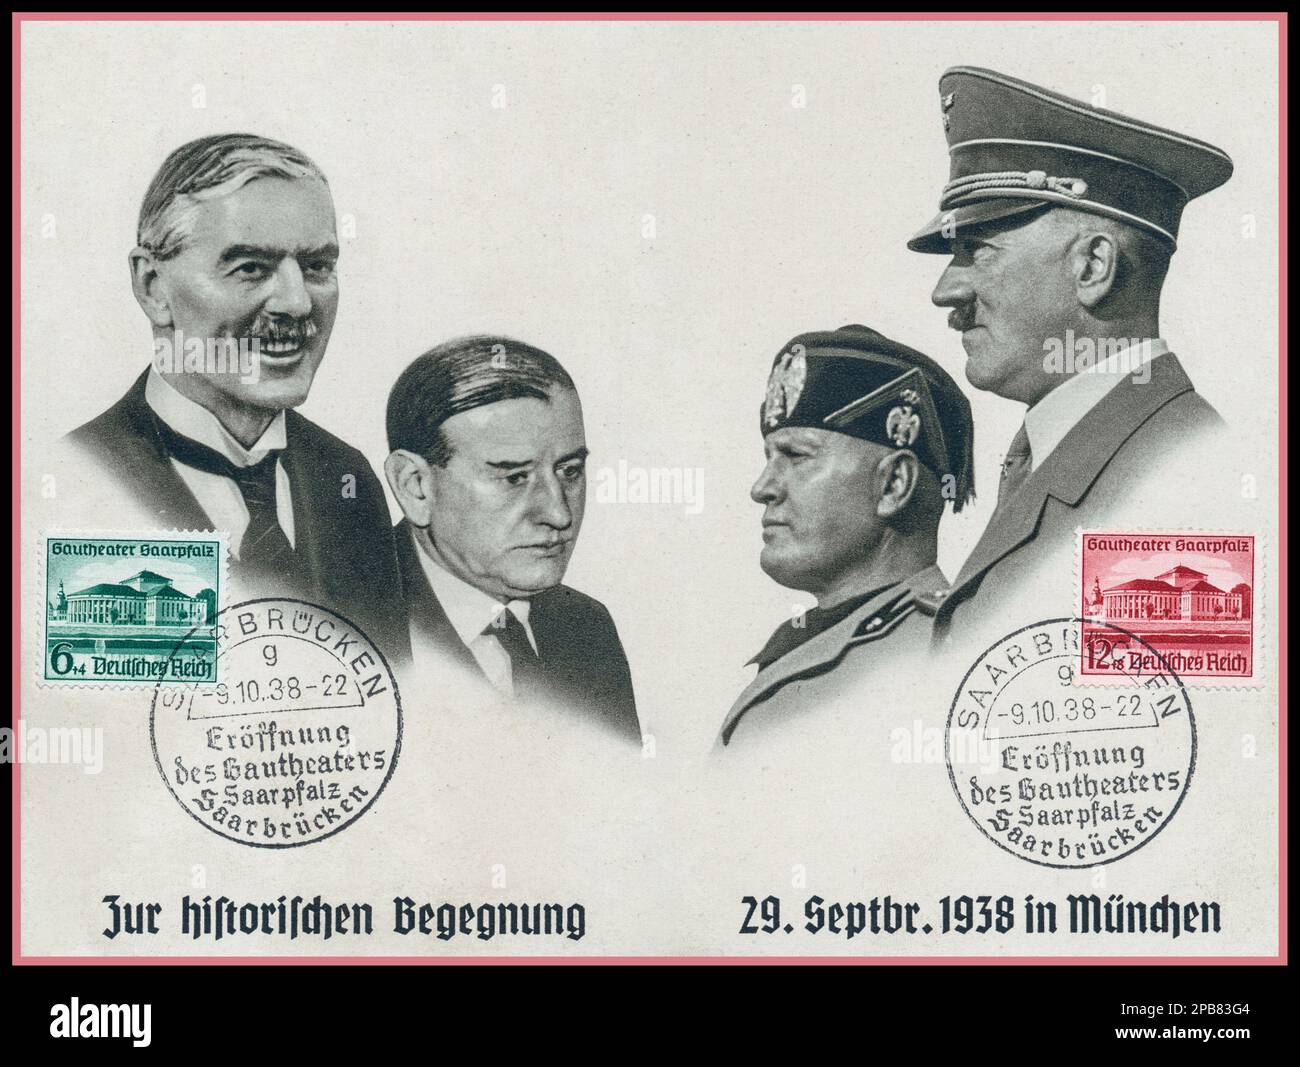 1938 Munich Agreement Nazi Germany Commemorative stamped Poster Card of Neville Chamberlain British Prime Minister with Edouard Daladier & Adolf Hitler Nazi Germany Leader together with Benito Mussolini Facist Leader Italy. ‘Our Historic Meeting 29th September 1938 in Munich’ Nazi Germany Stock Photo